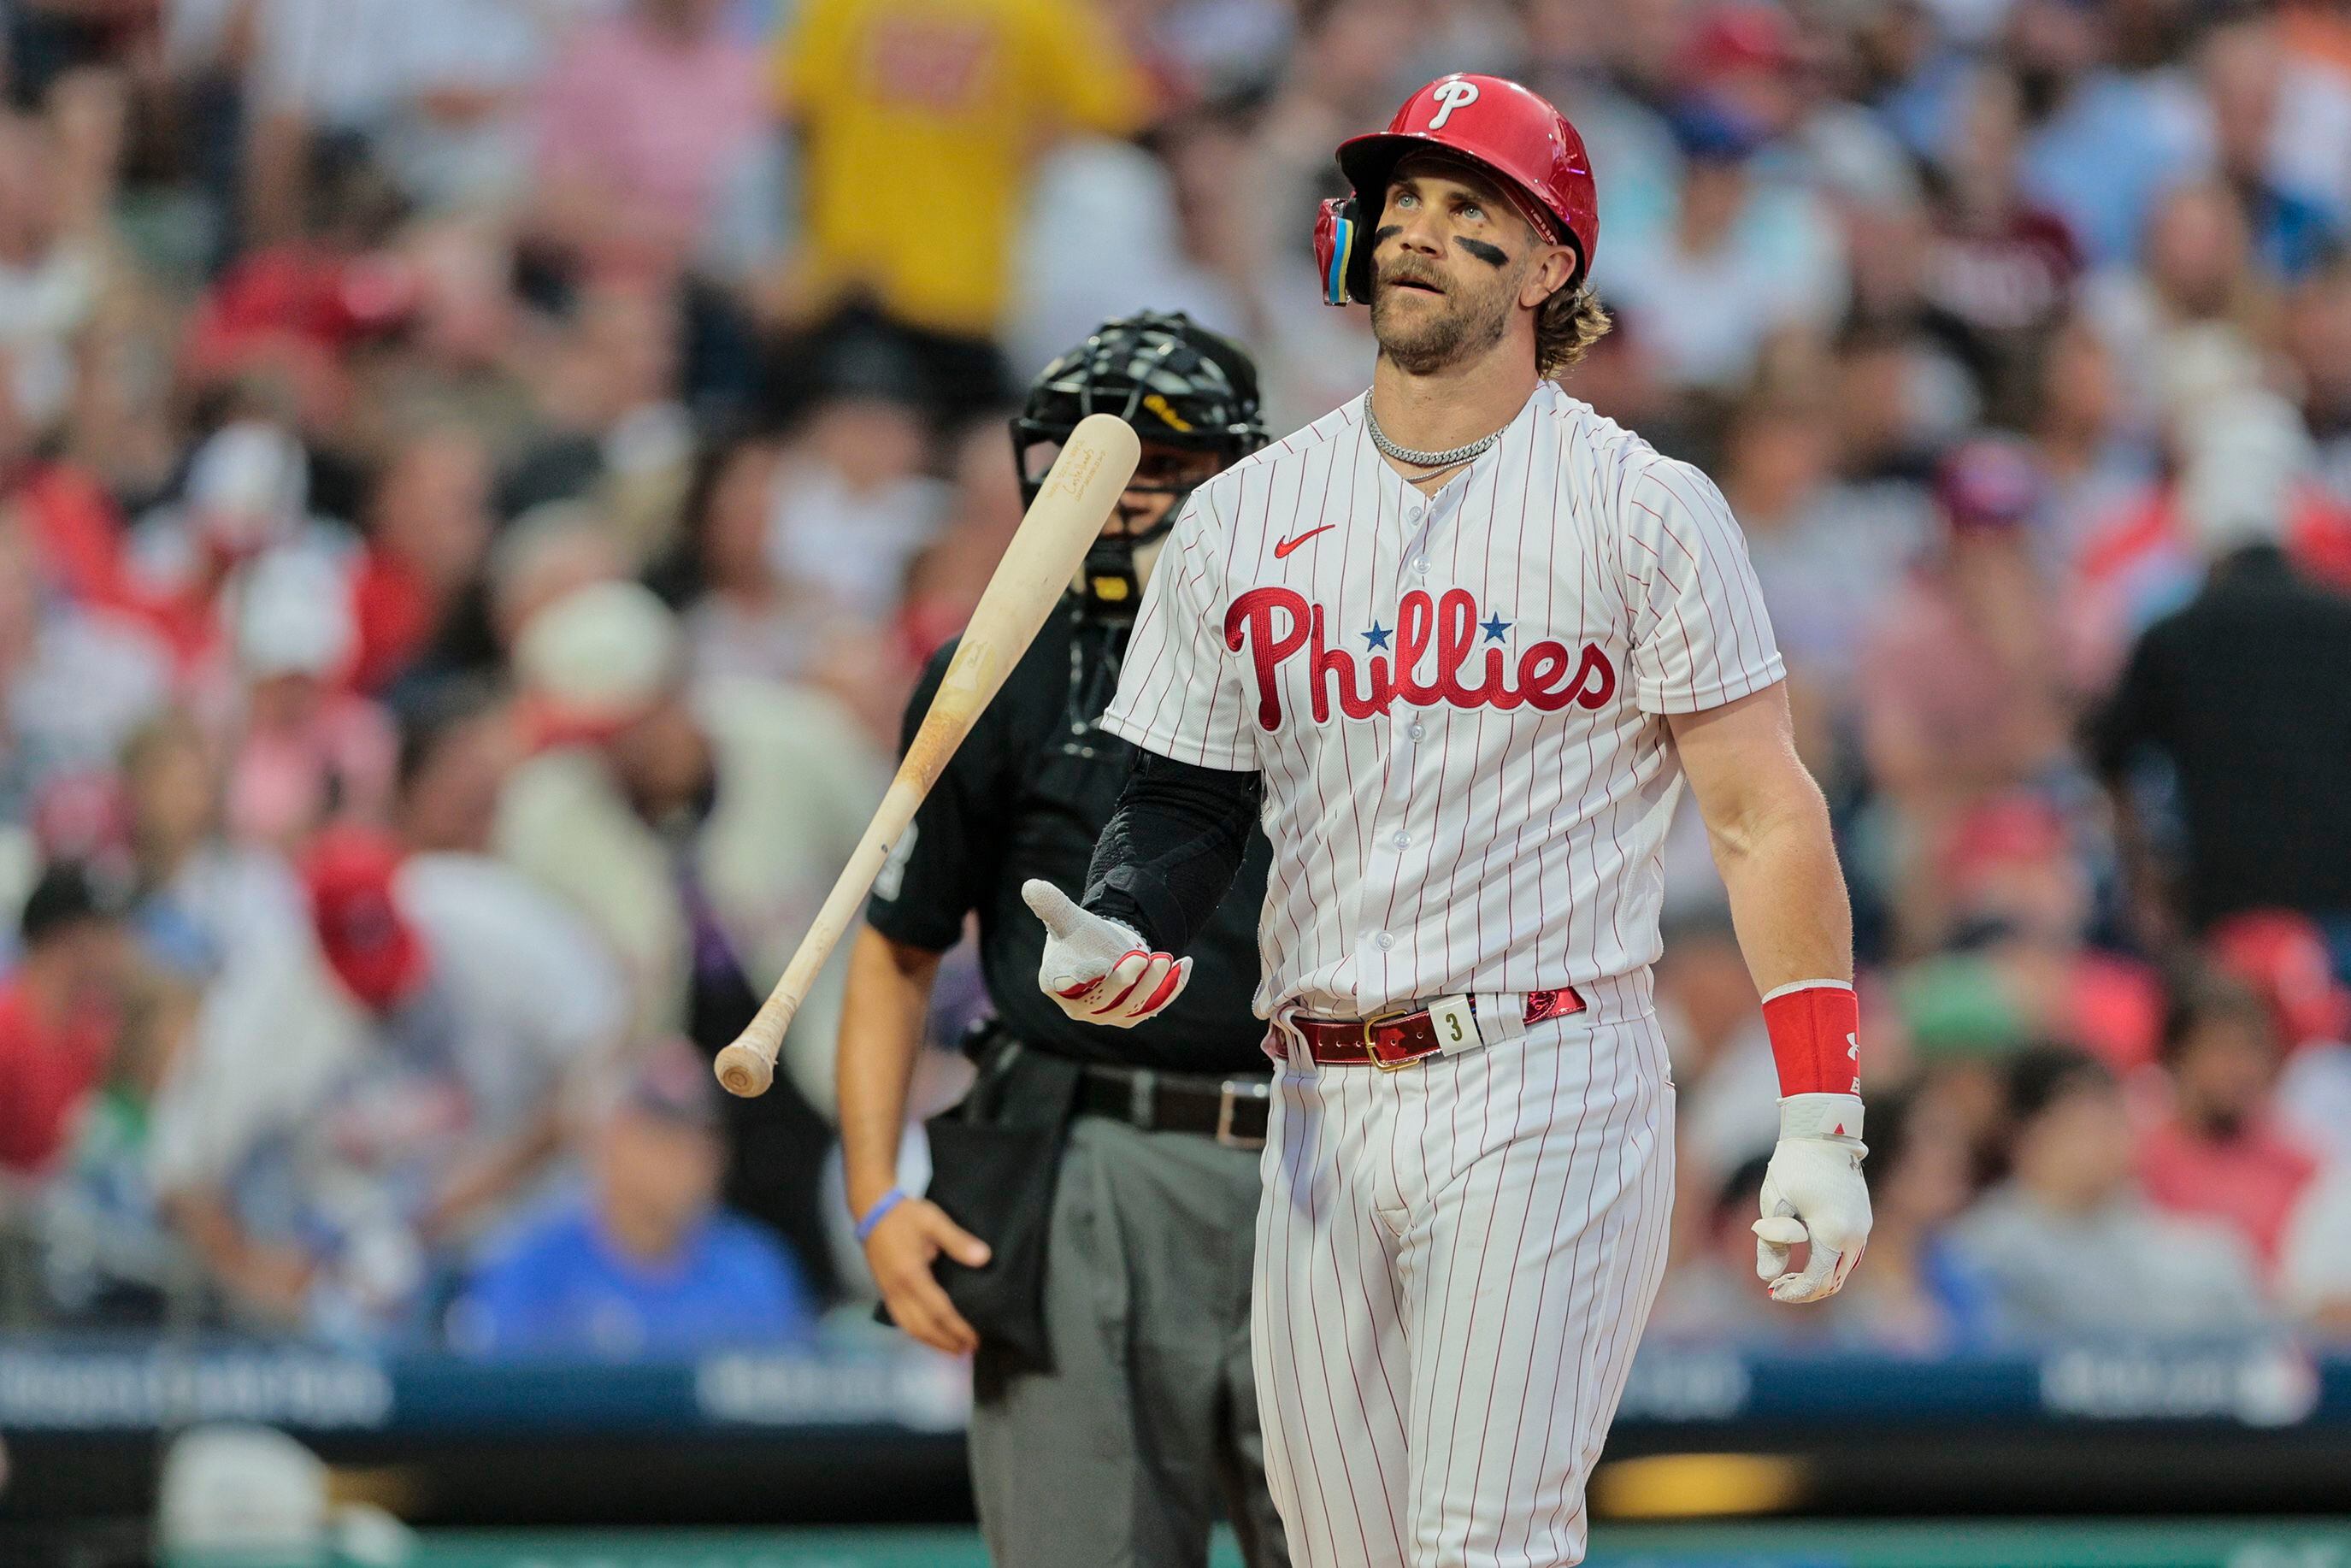 PHILS BRYCE HARPER MAY GET POWER FROM HIS LONG HAIR!